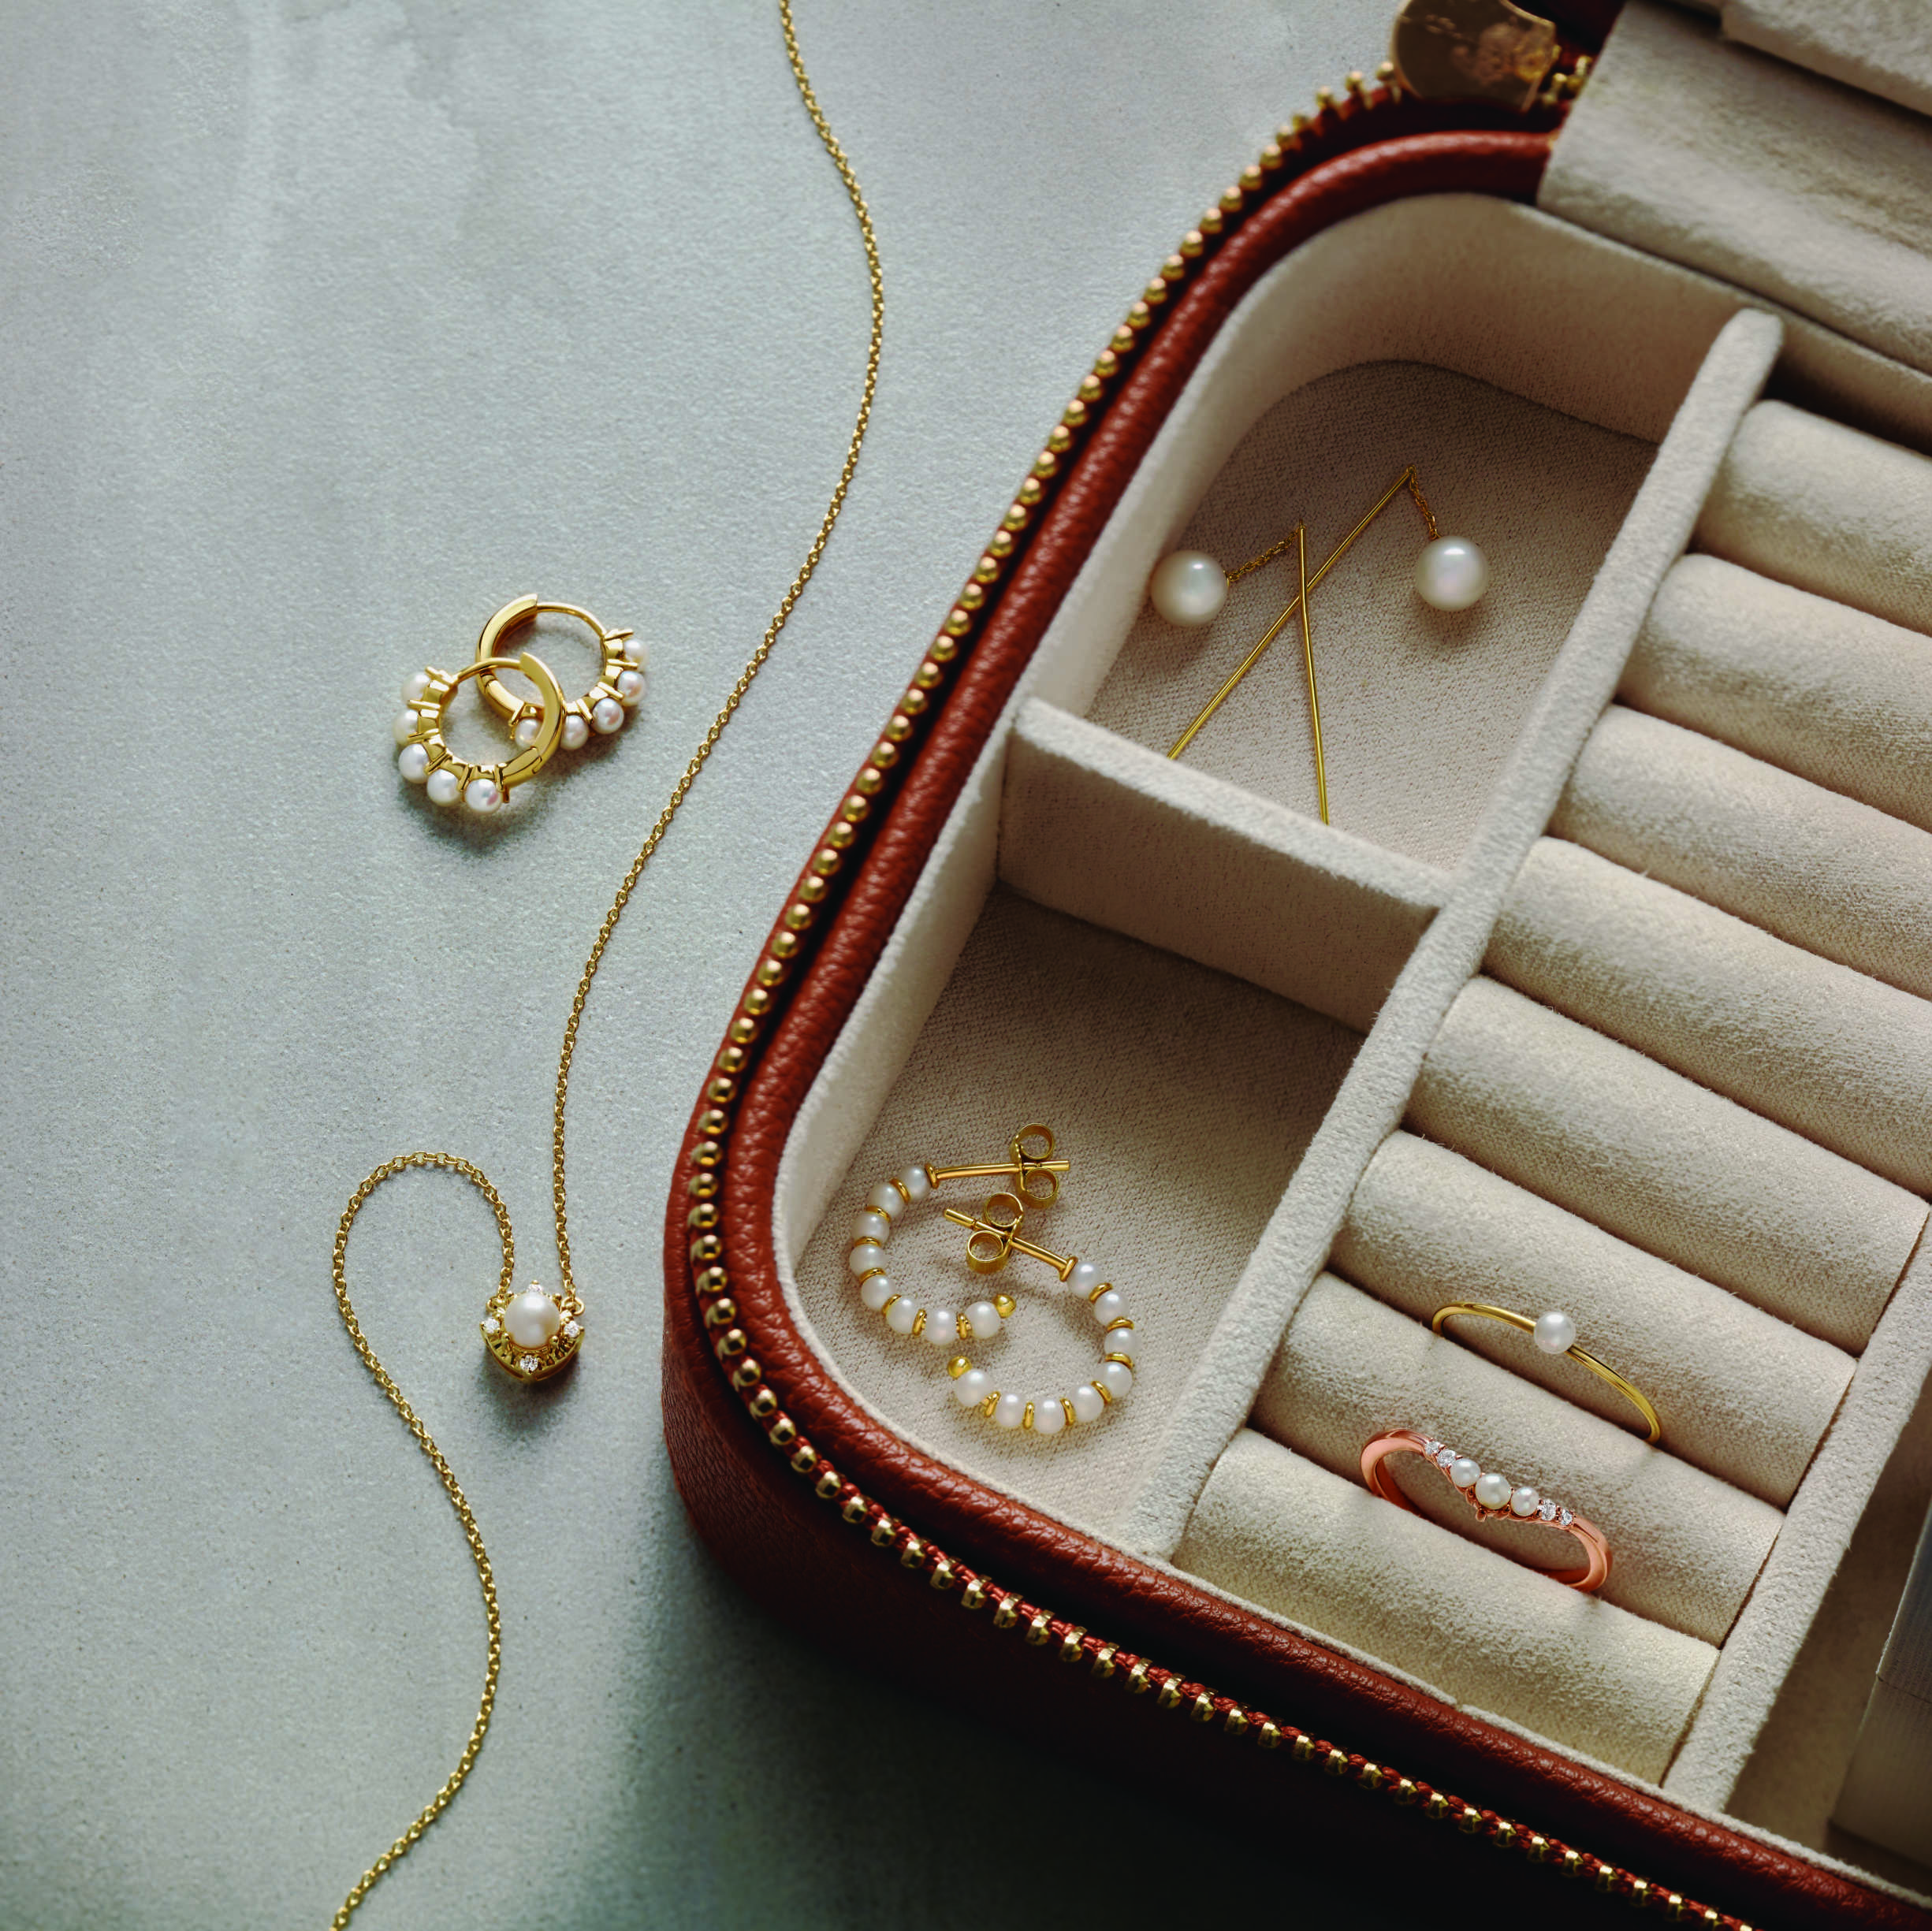 pearl and gold jewelry in jewelrybox